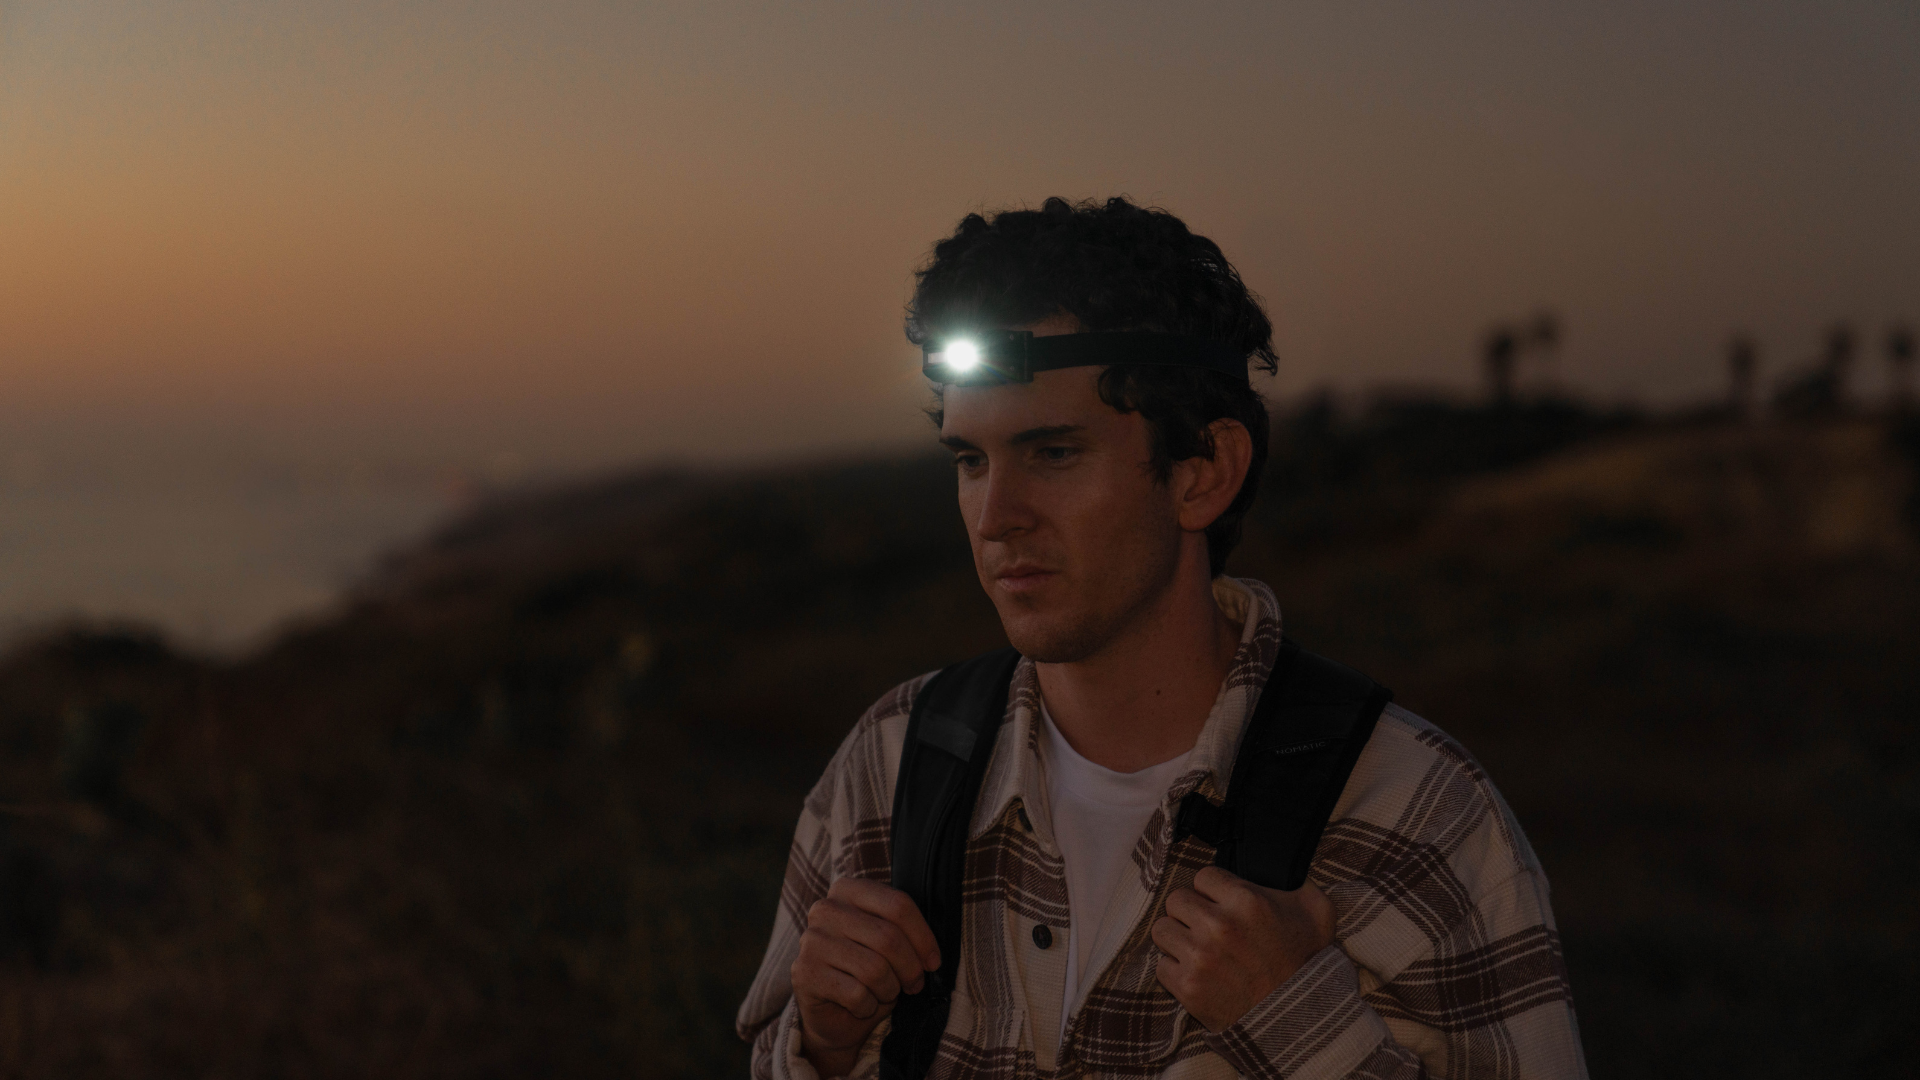 What to Look for in a Headlamp